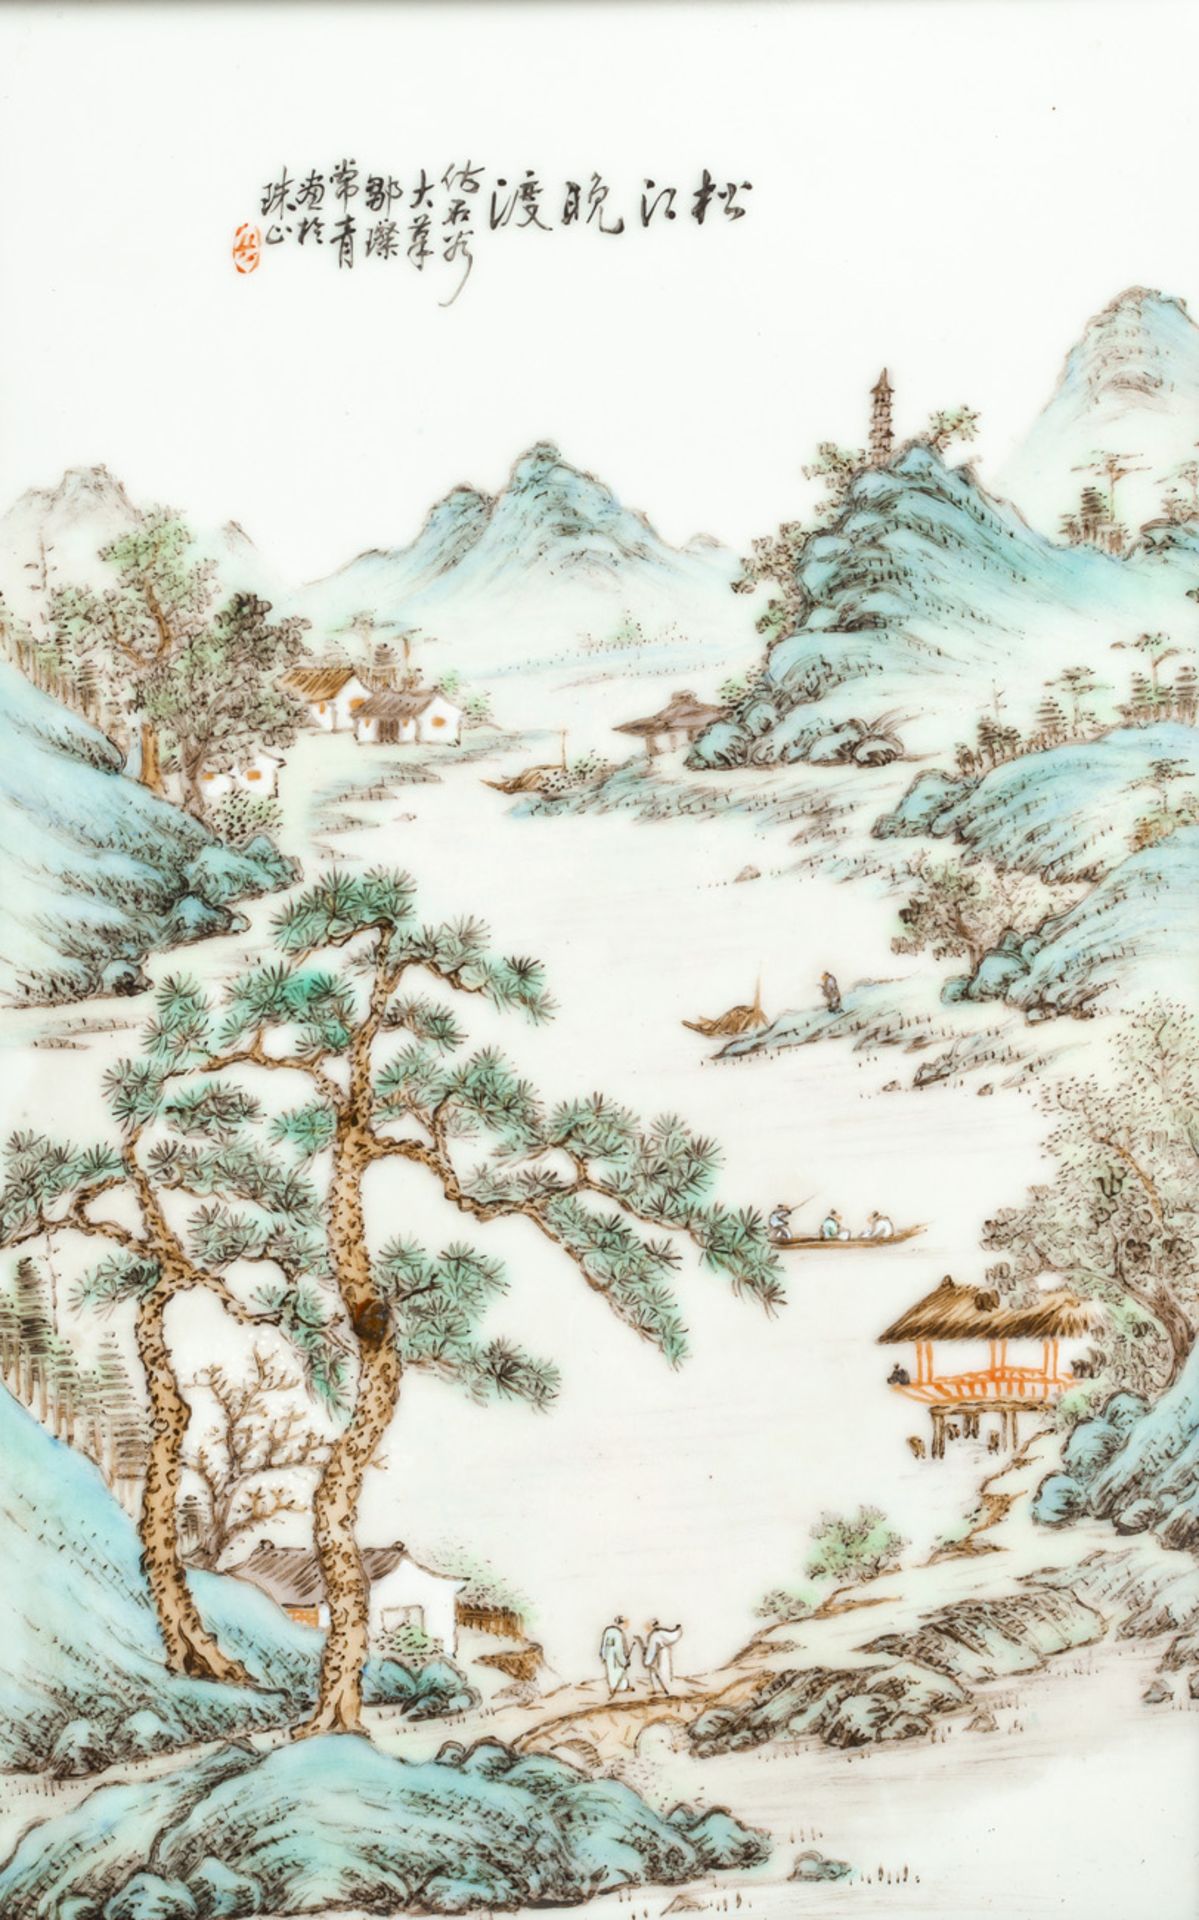 A PAIR OF SMALL PORCELAIN TILES PATINTED WITH FINE POLYCHROME LANDSCAPE DEPICTIONS - Image 3 of 5